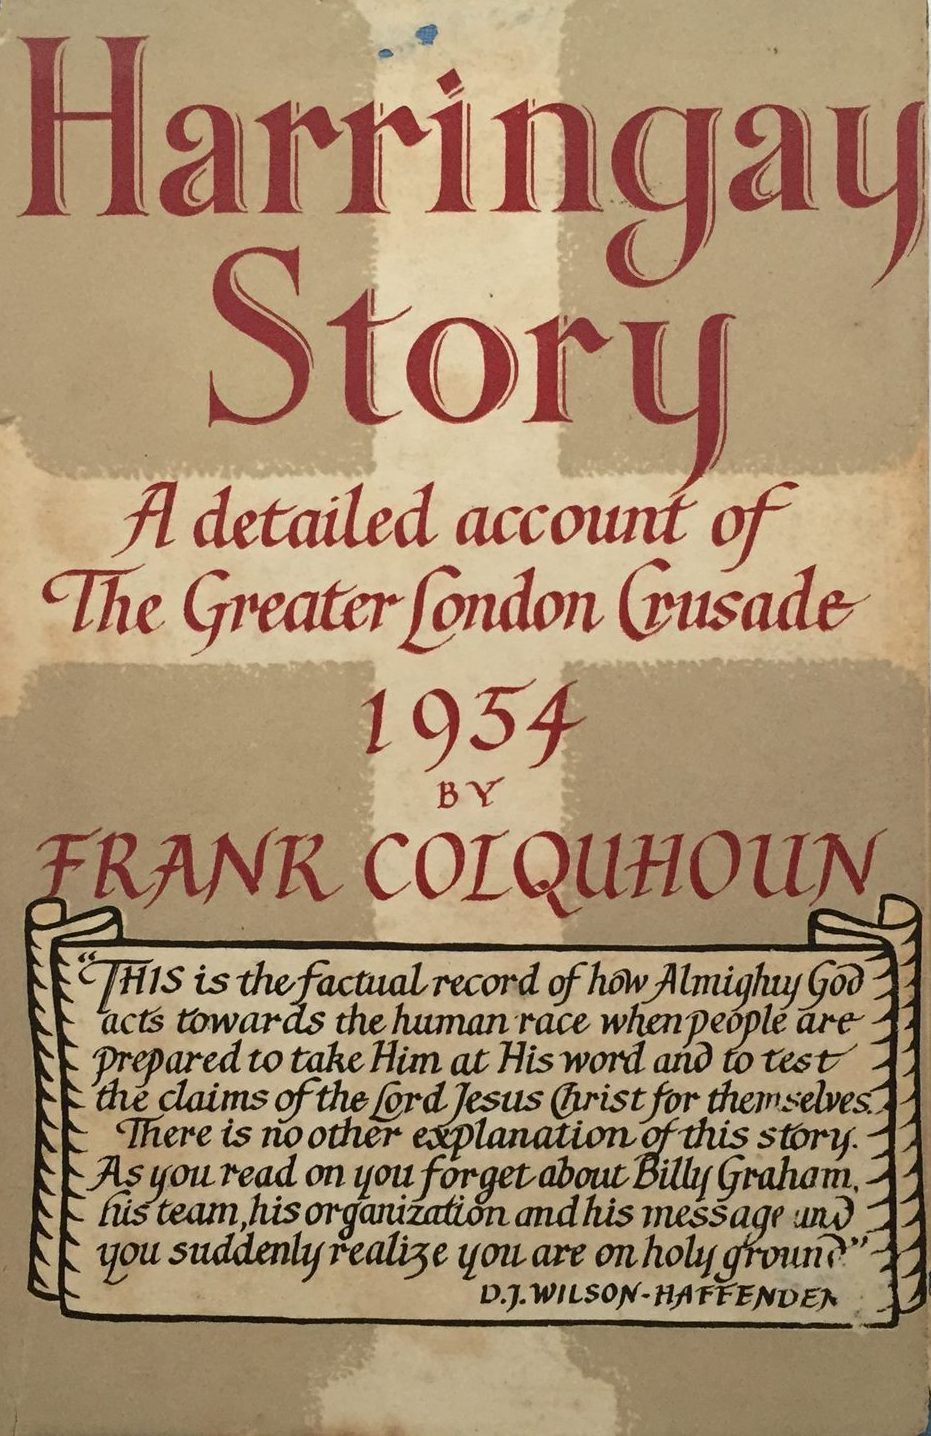 HARRINGAY STORY: A detailed account of The Greater London Crusade 1954